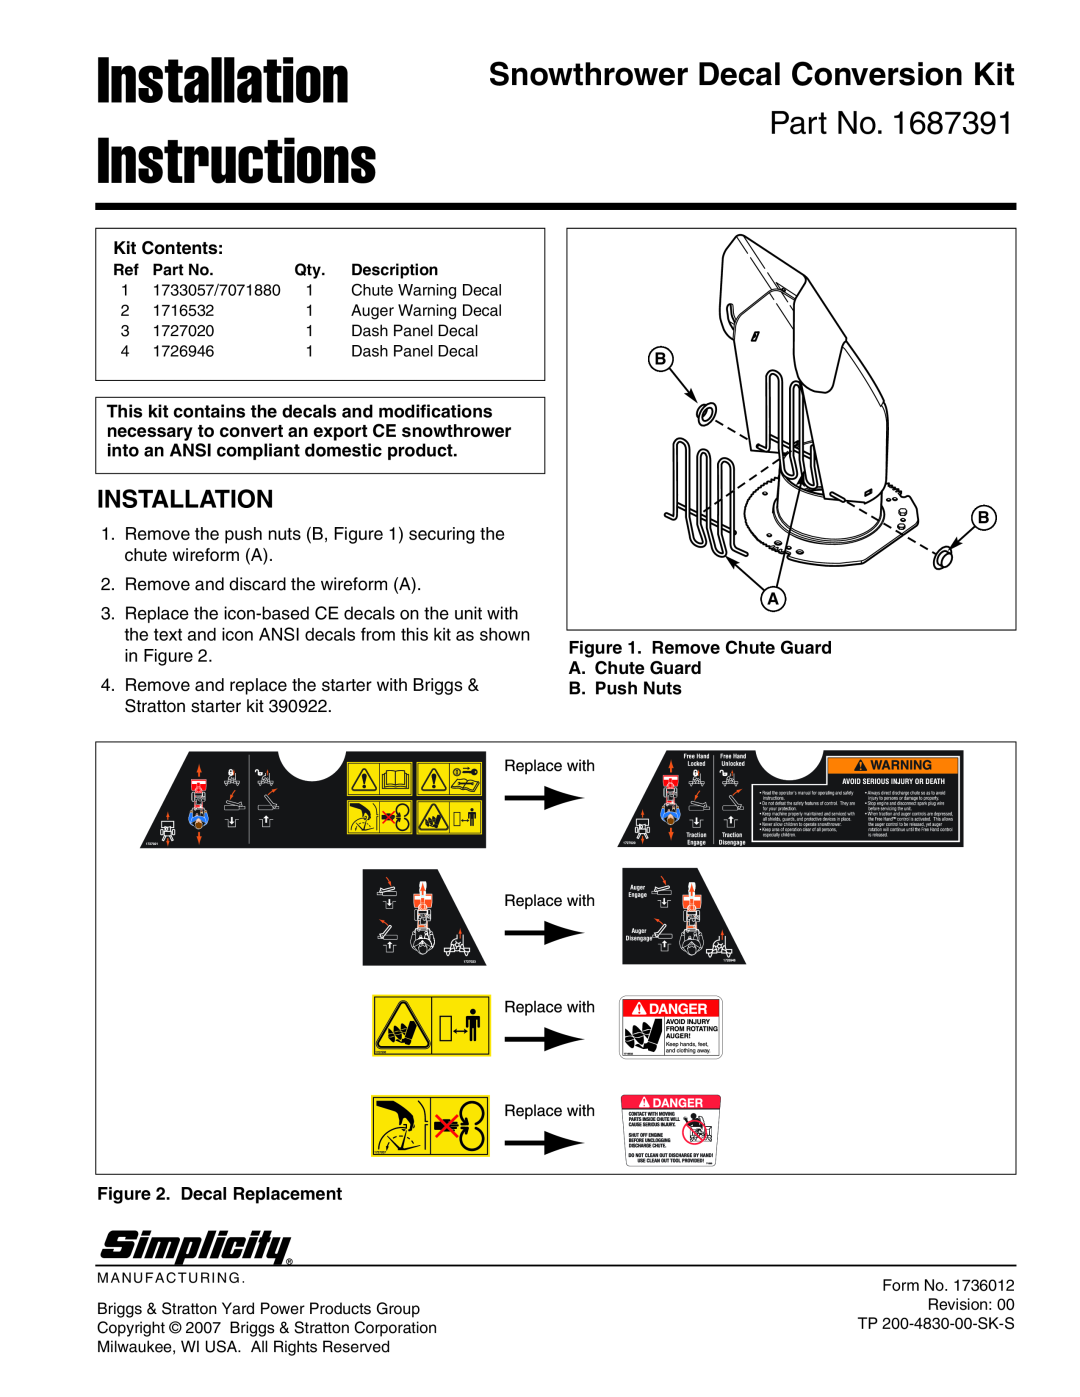 Simplicity 1726946, 1727020 installation instructions Installation Instructions, Snowthrower Decal Conversion Kit, Part No 